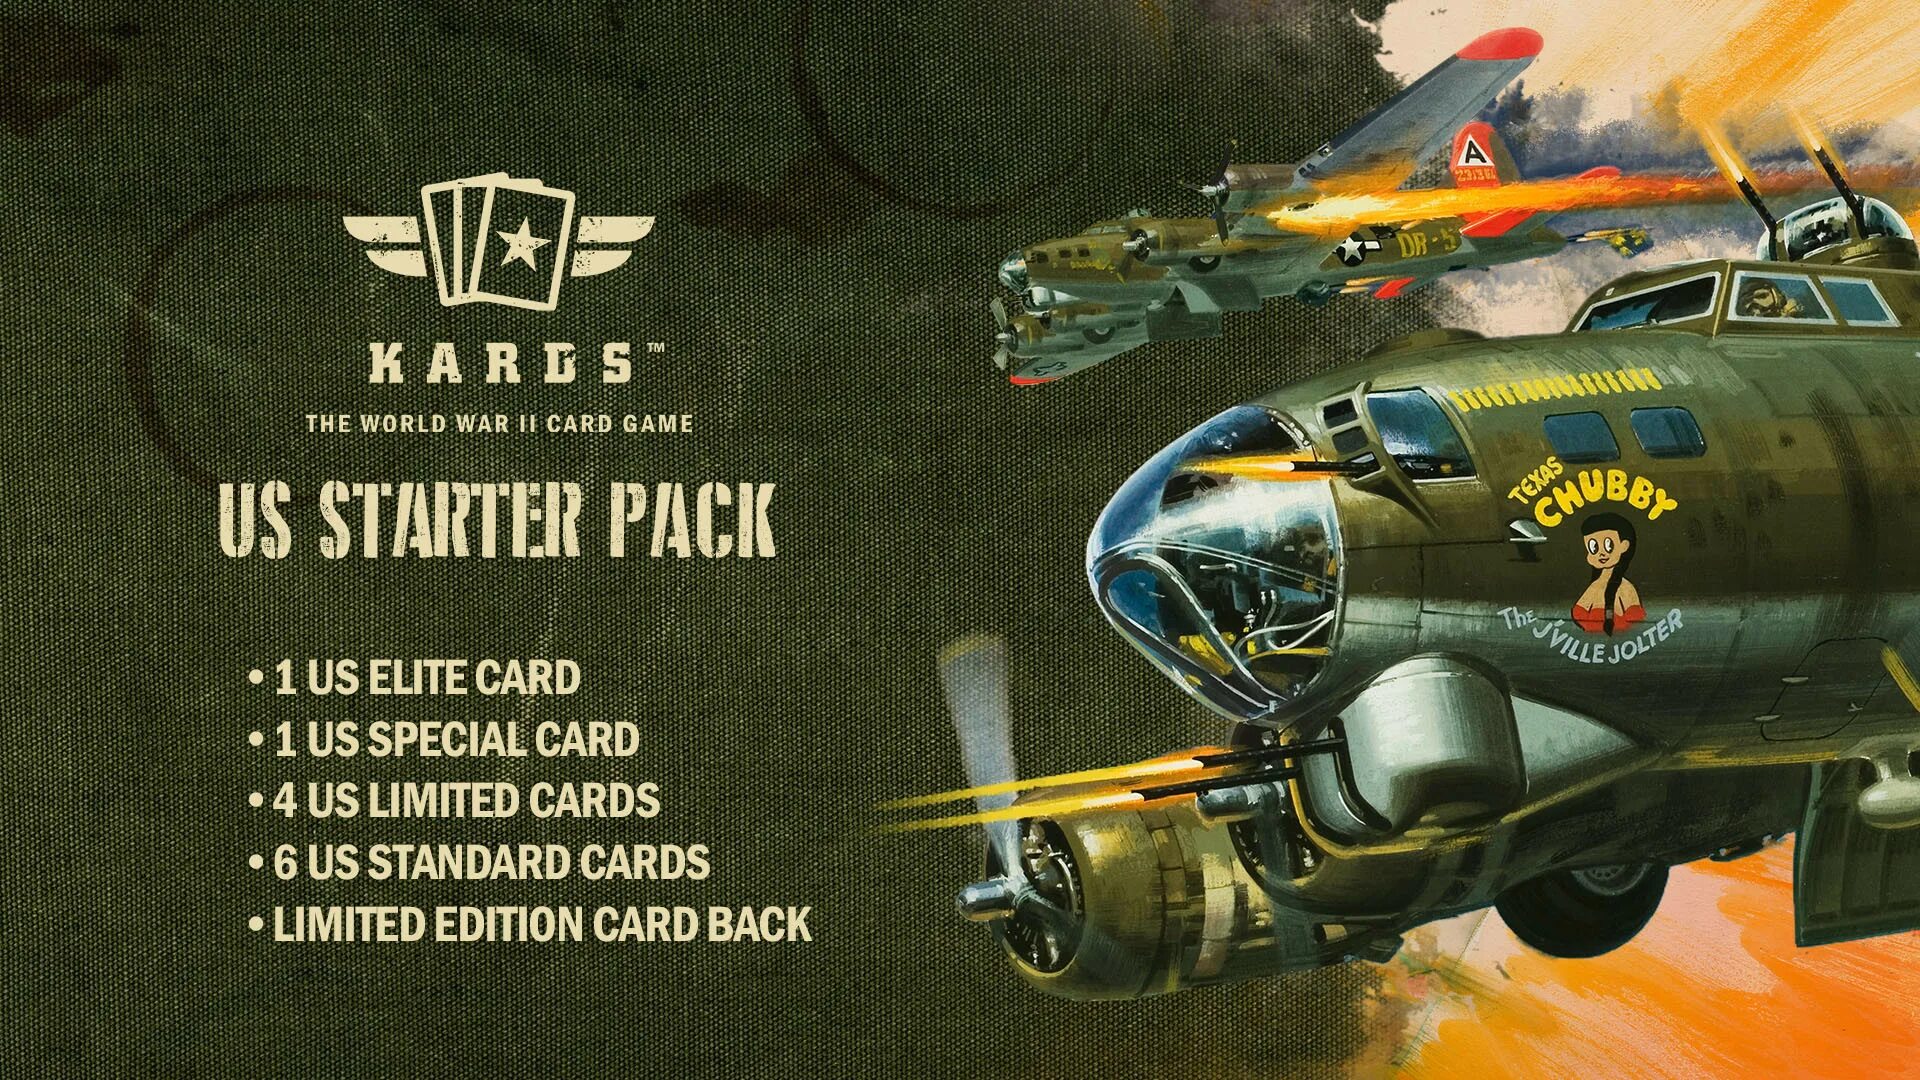 Kards игра. KARDS the WWII Card game. KARDS - Starter Pack. K.A.R.D.S игра.